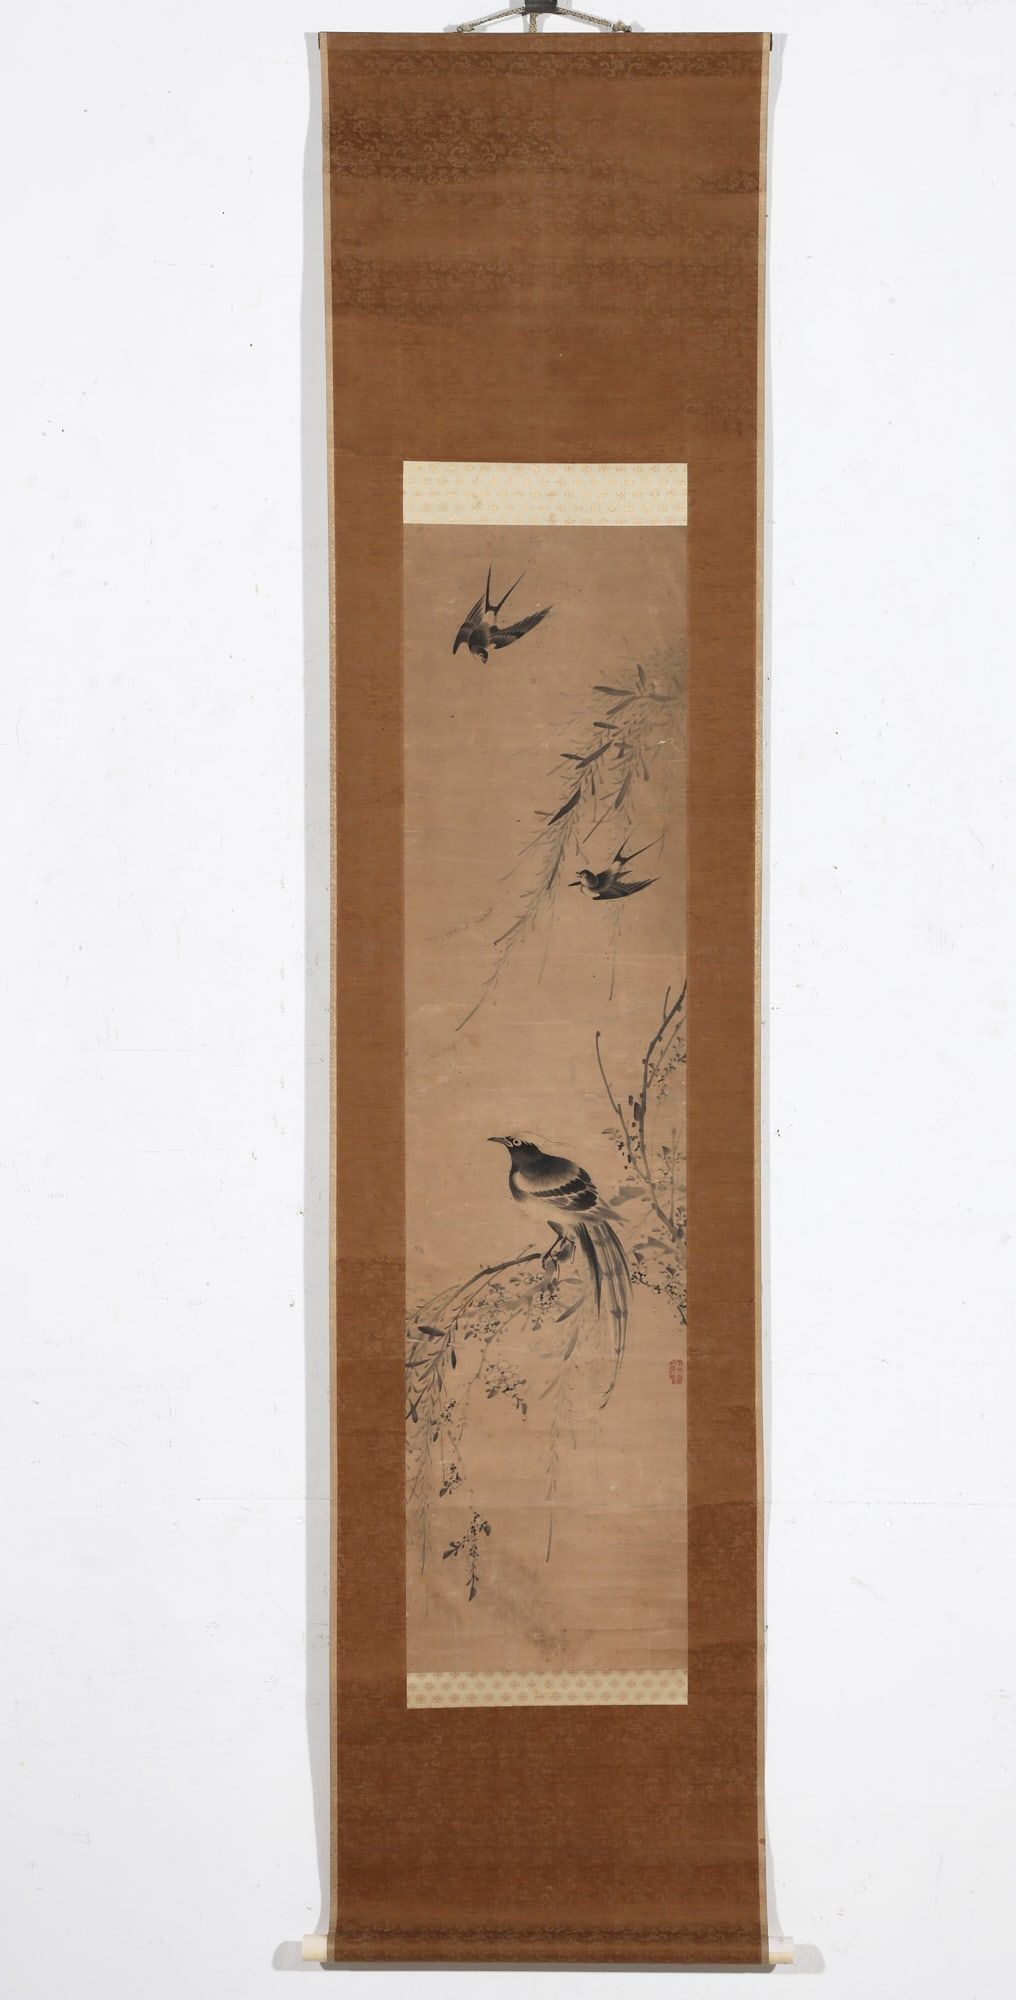 A CHINESE SCROLL DEPICTING BIRDS 2fb33e4